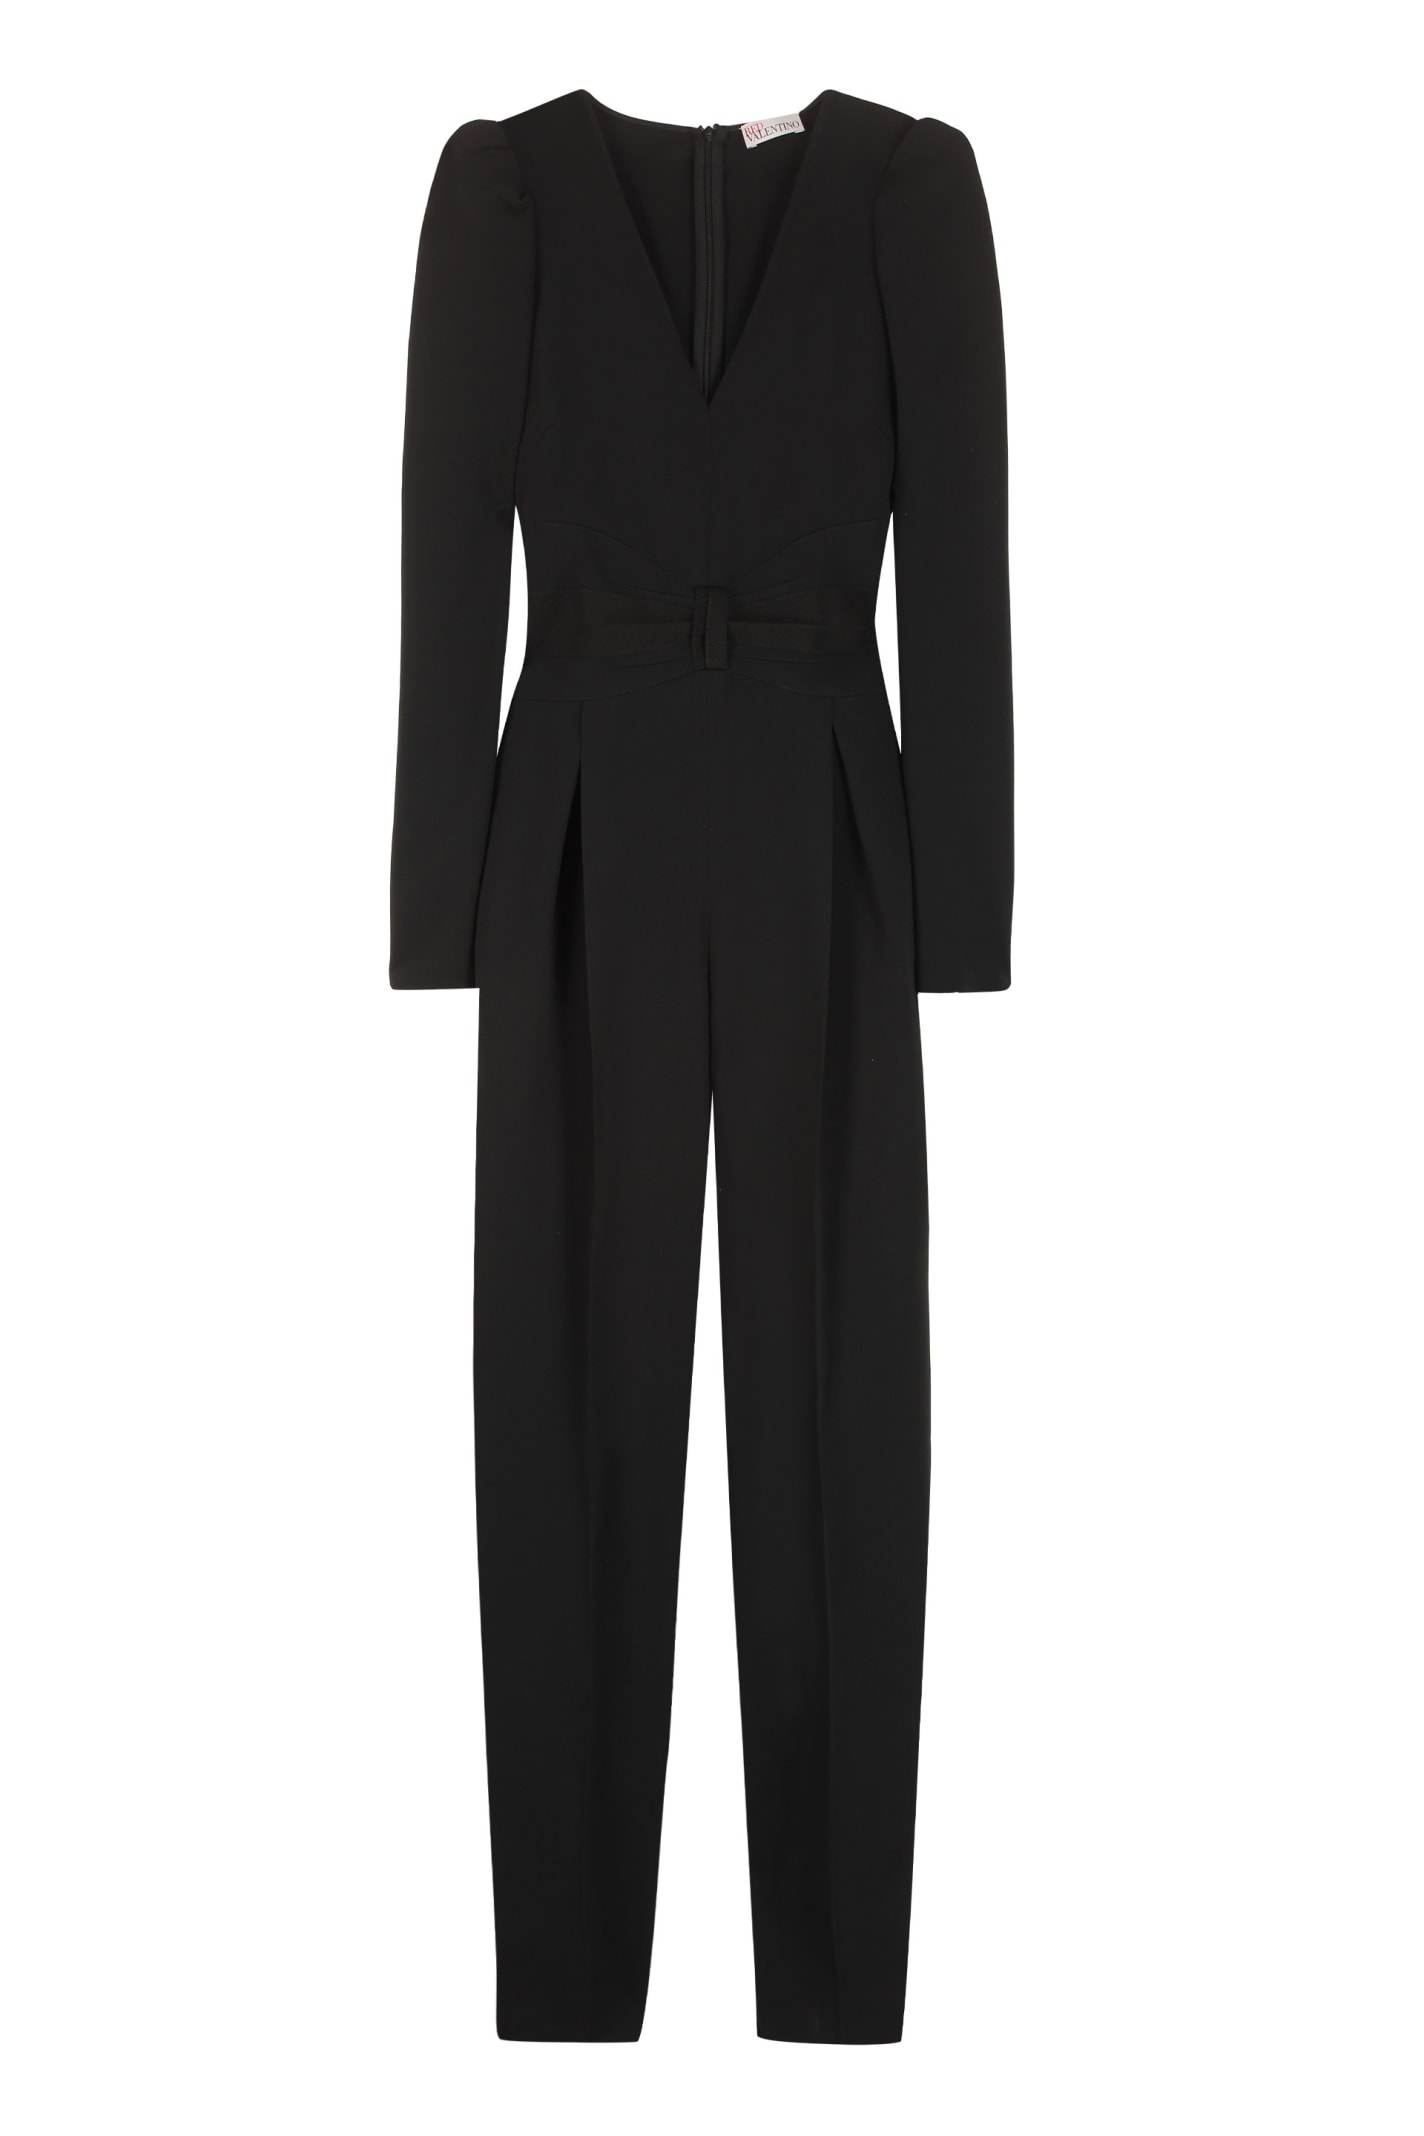 Red Valentino Cady Tracksuit In Black